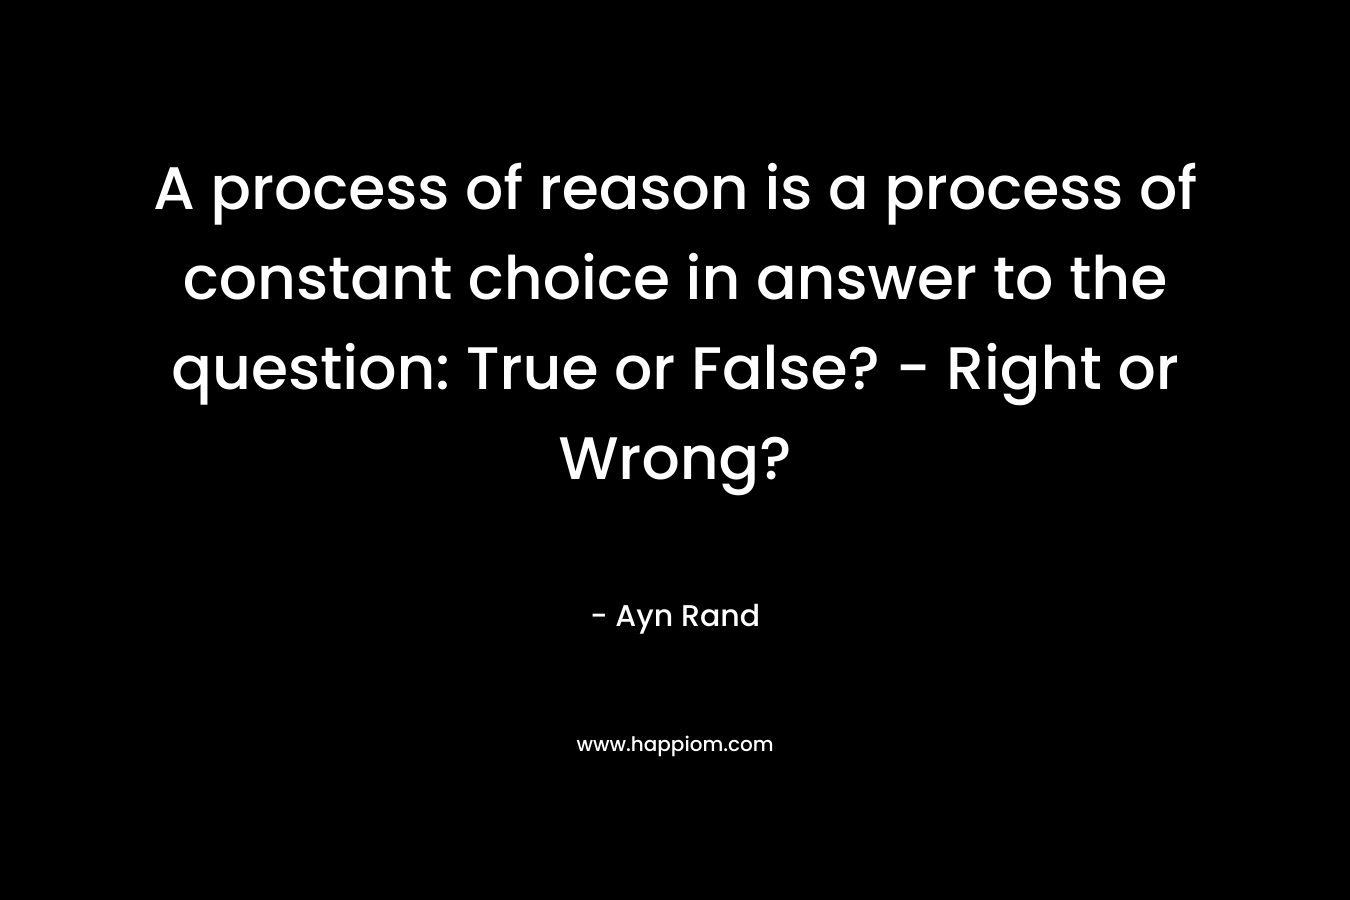 A process of reason is a process of constant choice in answer to the question: True or False? - Right or Wrong?